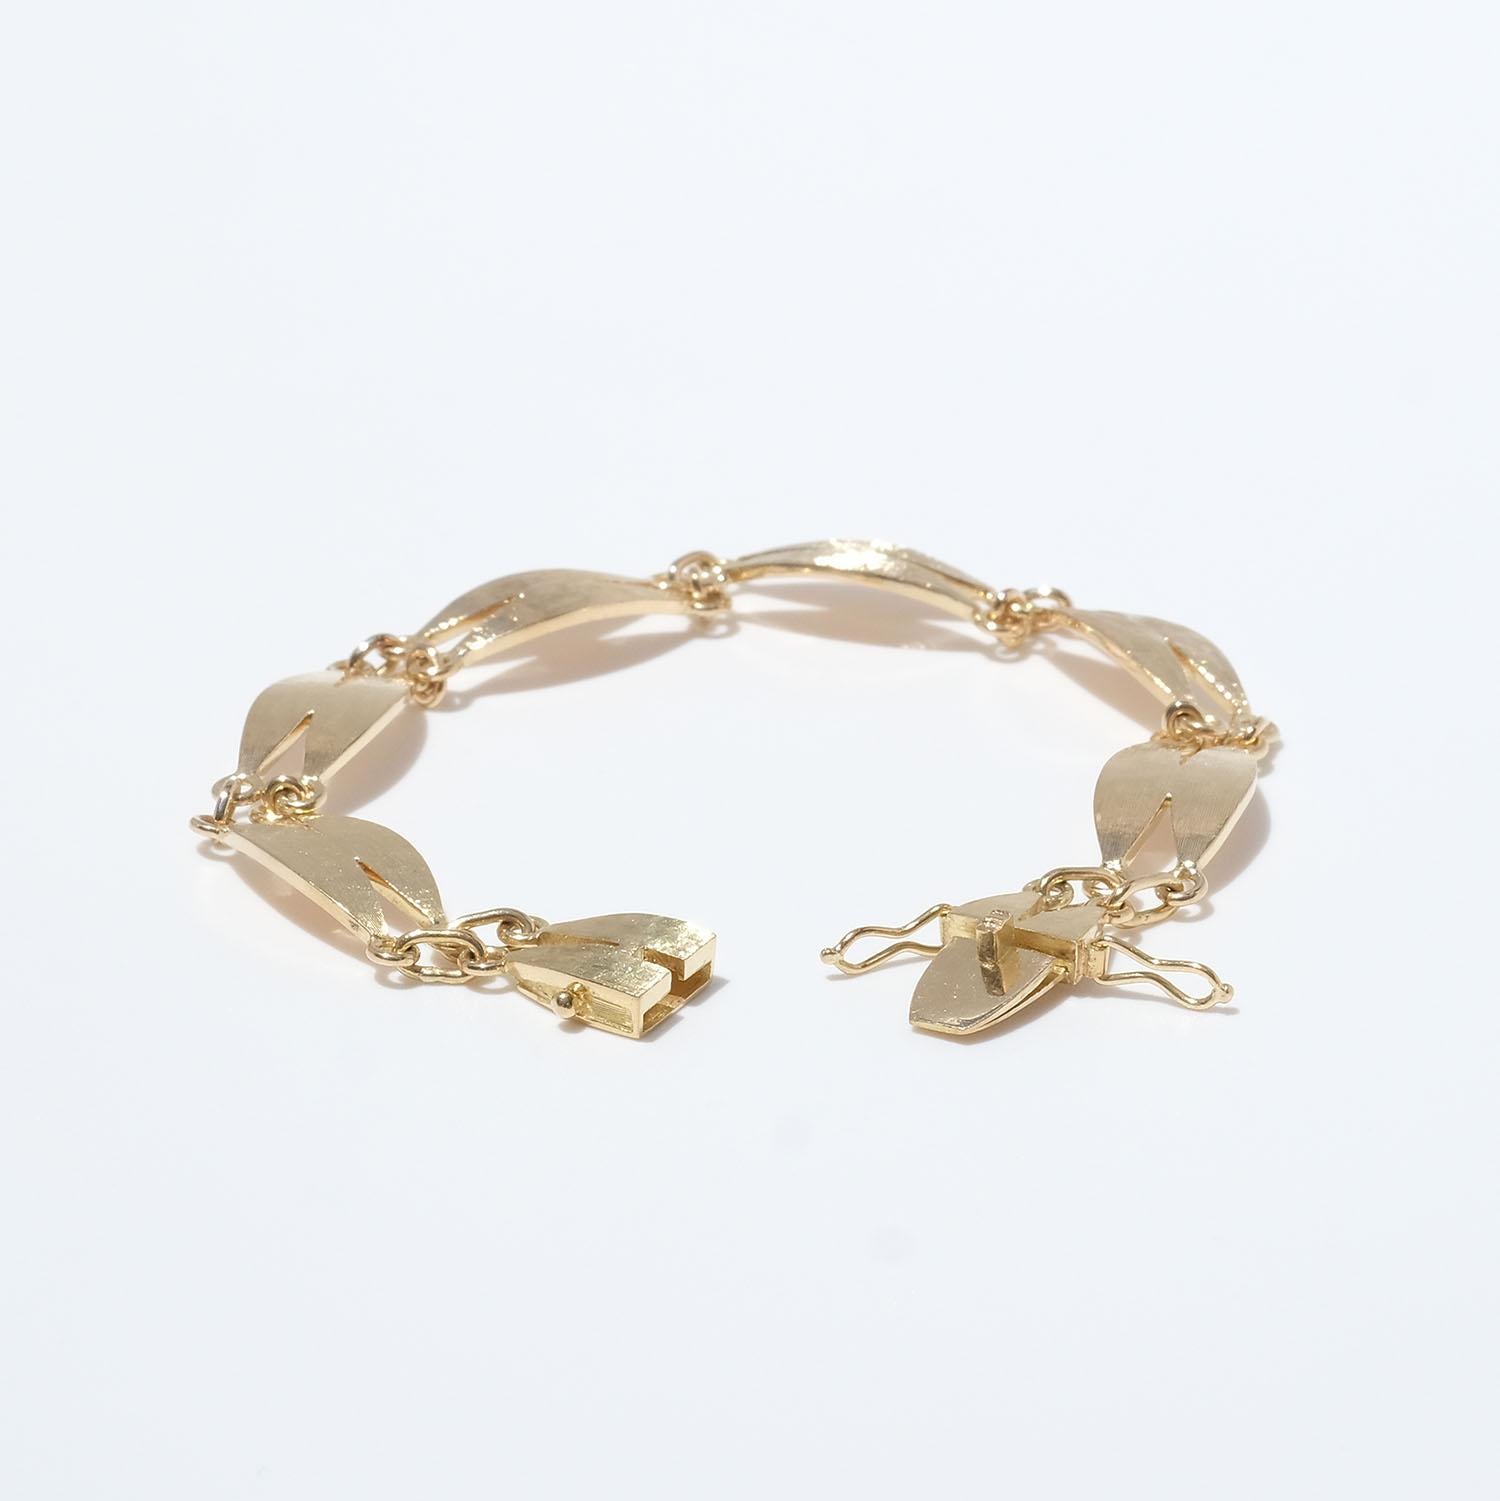 Vintage 18k Gold Bracelet by Swedish Master Rey Urban Made Year 1967 In Good Condition For Sale In Stockholm, SE